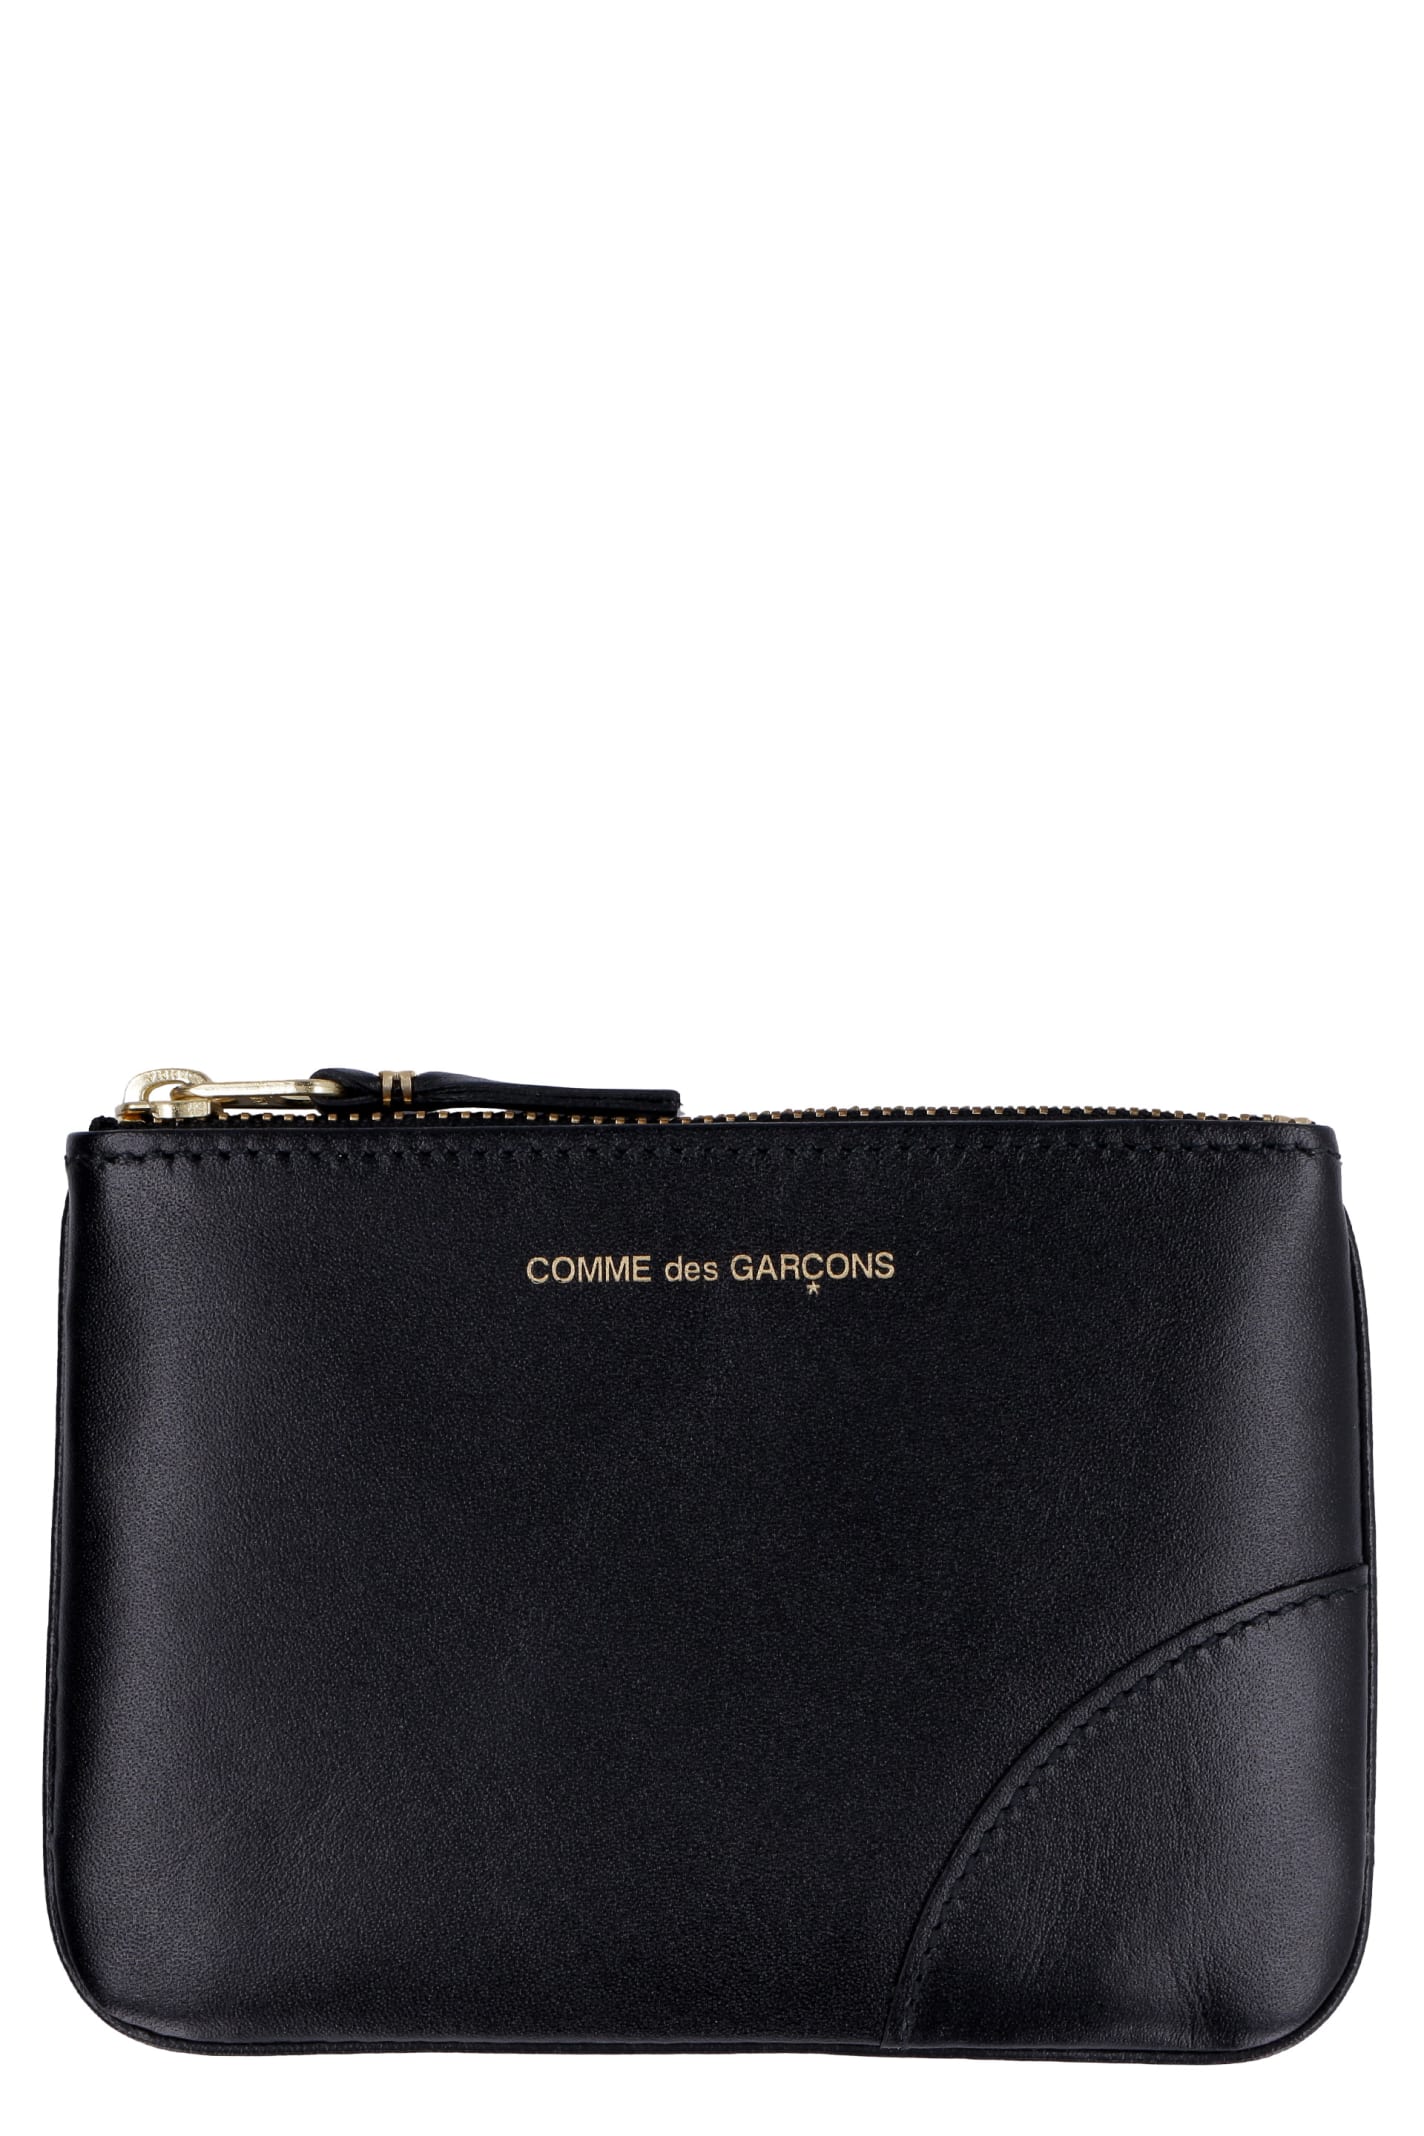 Comme Des Garçons Small Leather Flat Pouch In Black